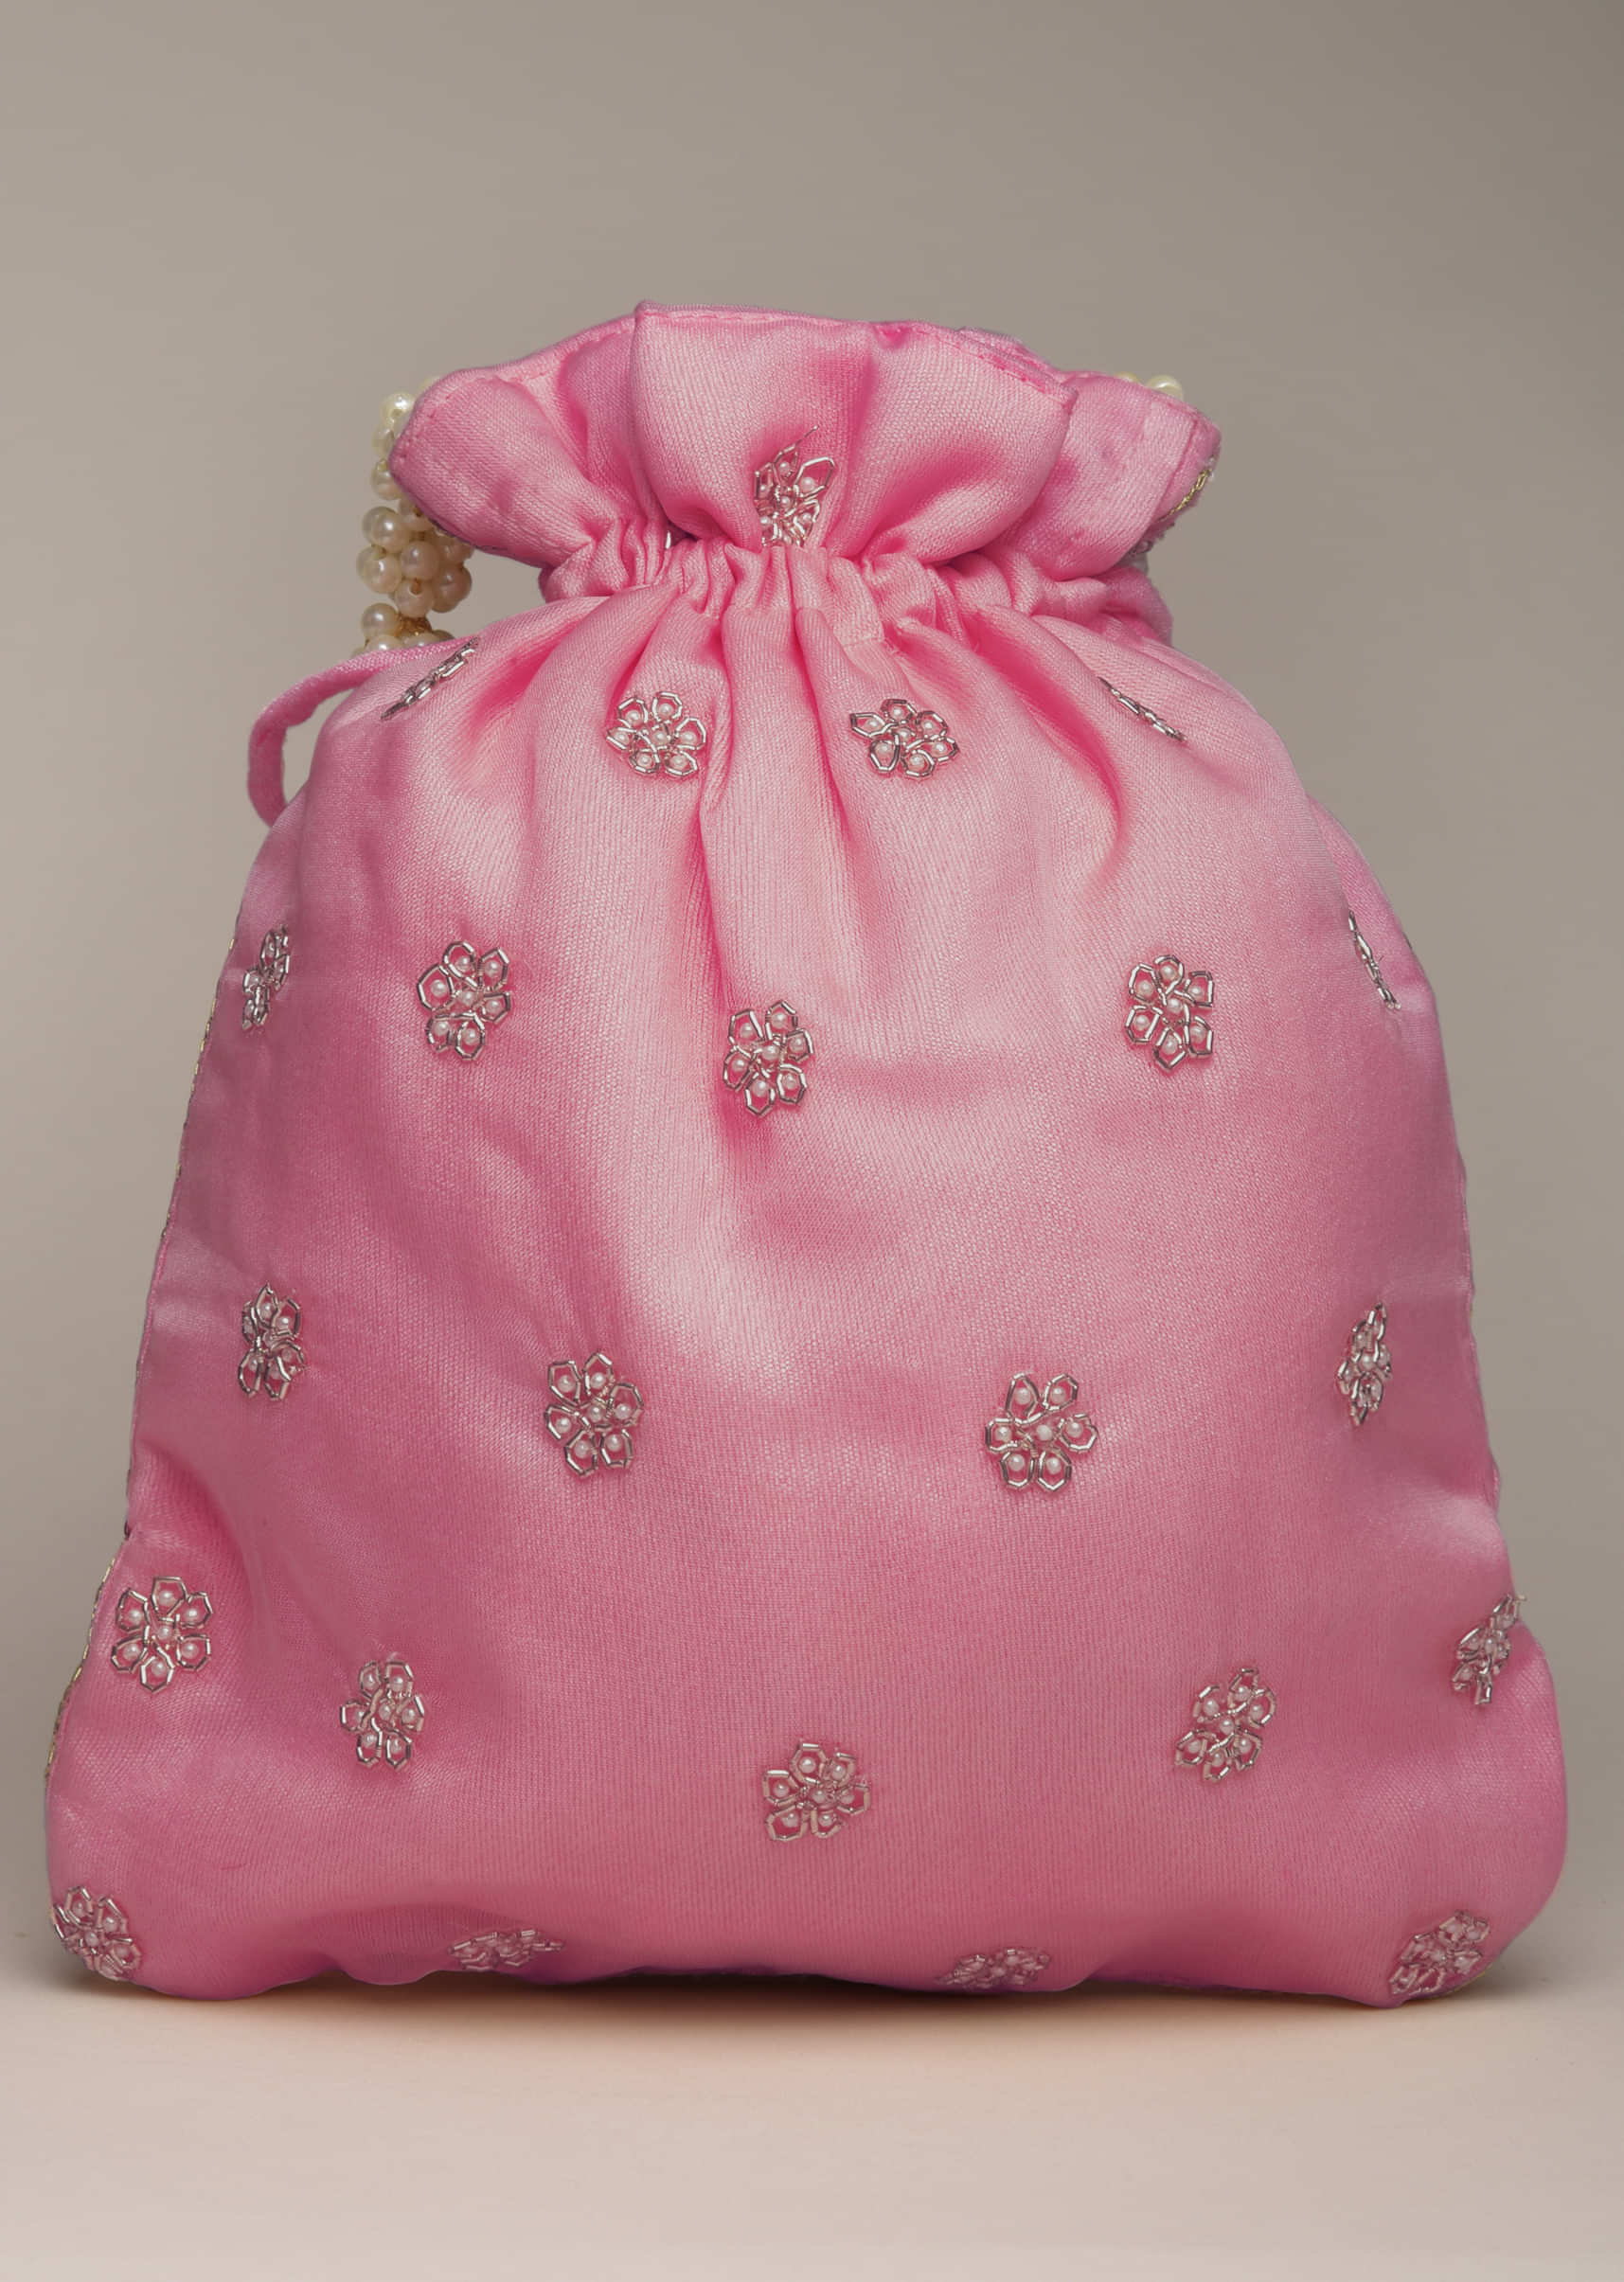 Salmon Pink Potli Bag In Raw Silk With Satin Moti Embroidery In Rose Motif And Floral Design